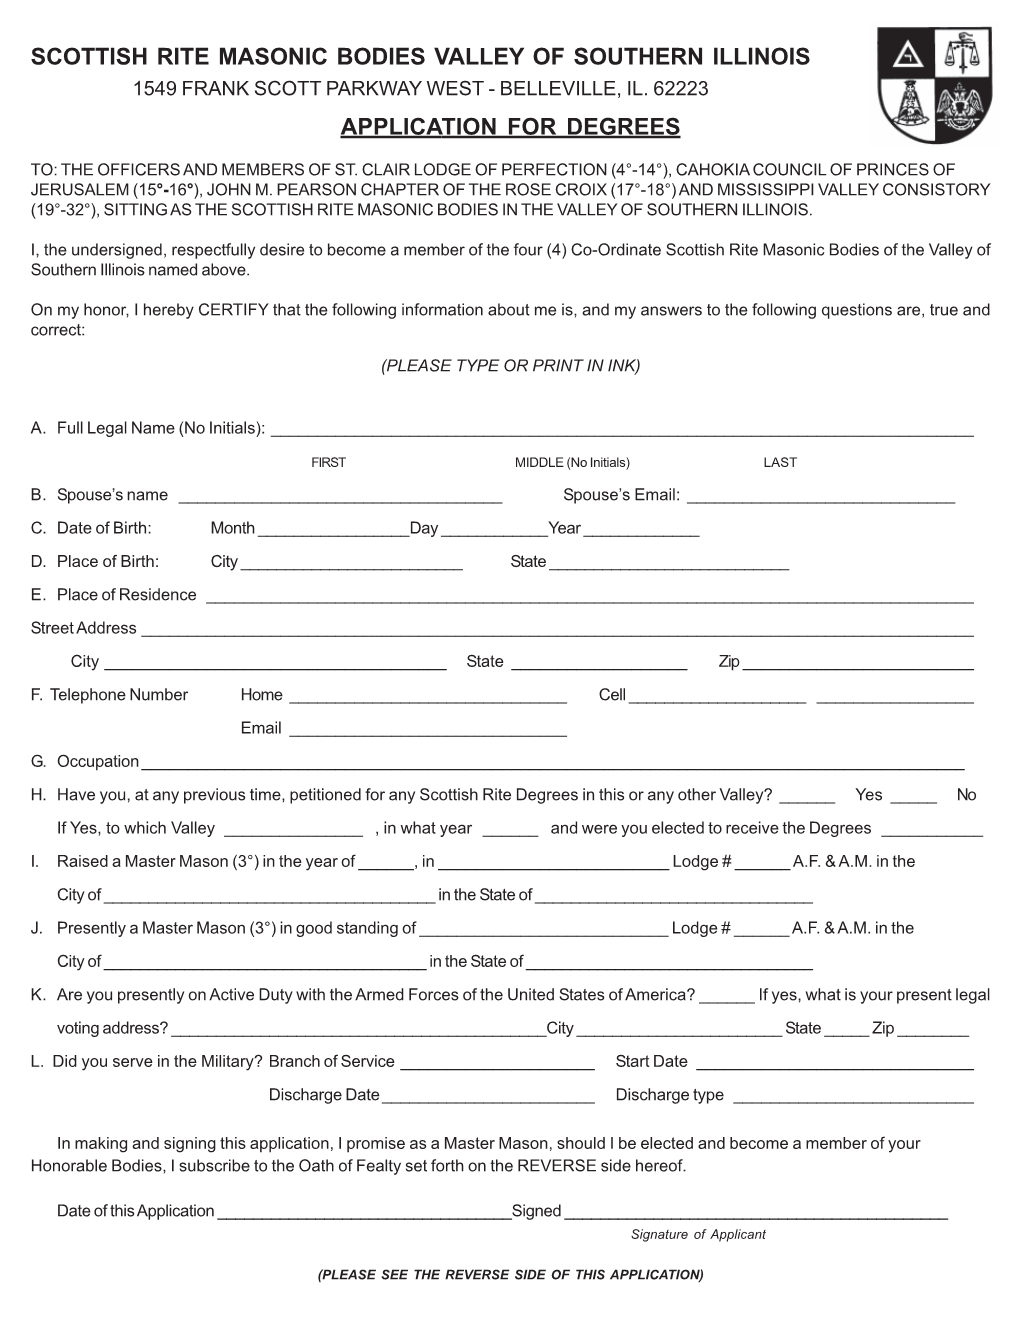 Scottish Rite Masonic Bodies Valley of Southern Illinois Application for Degrees